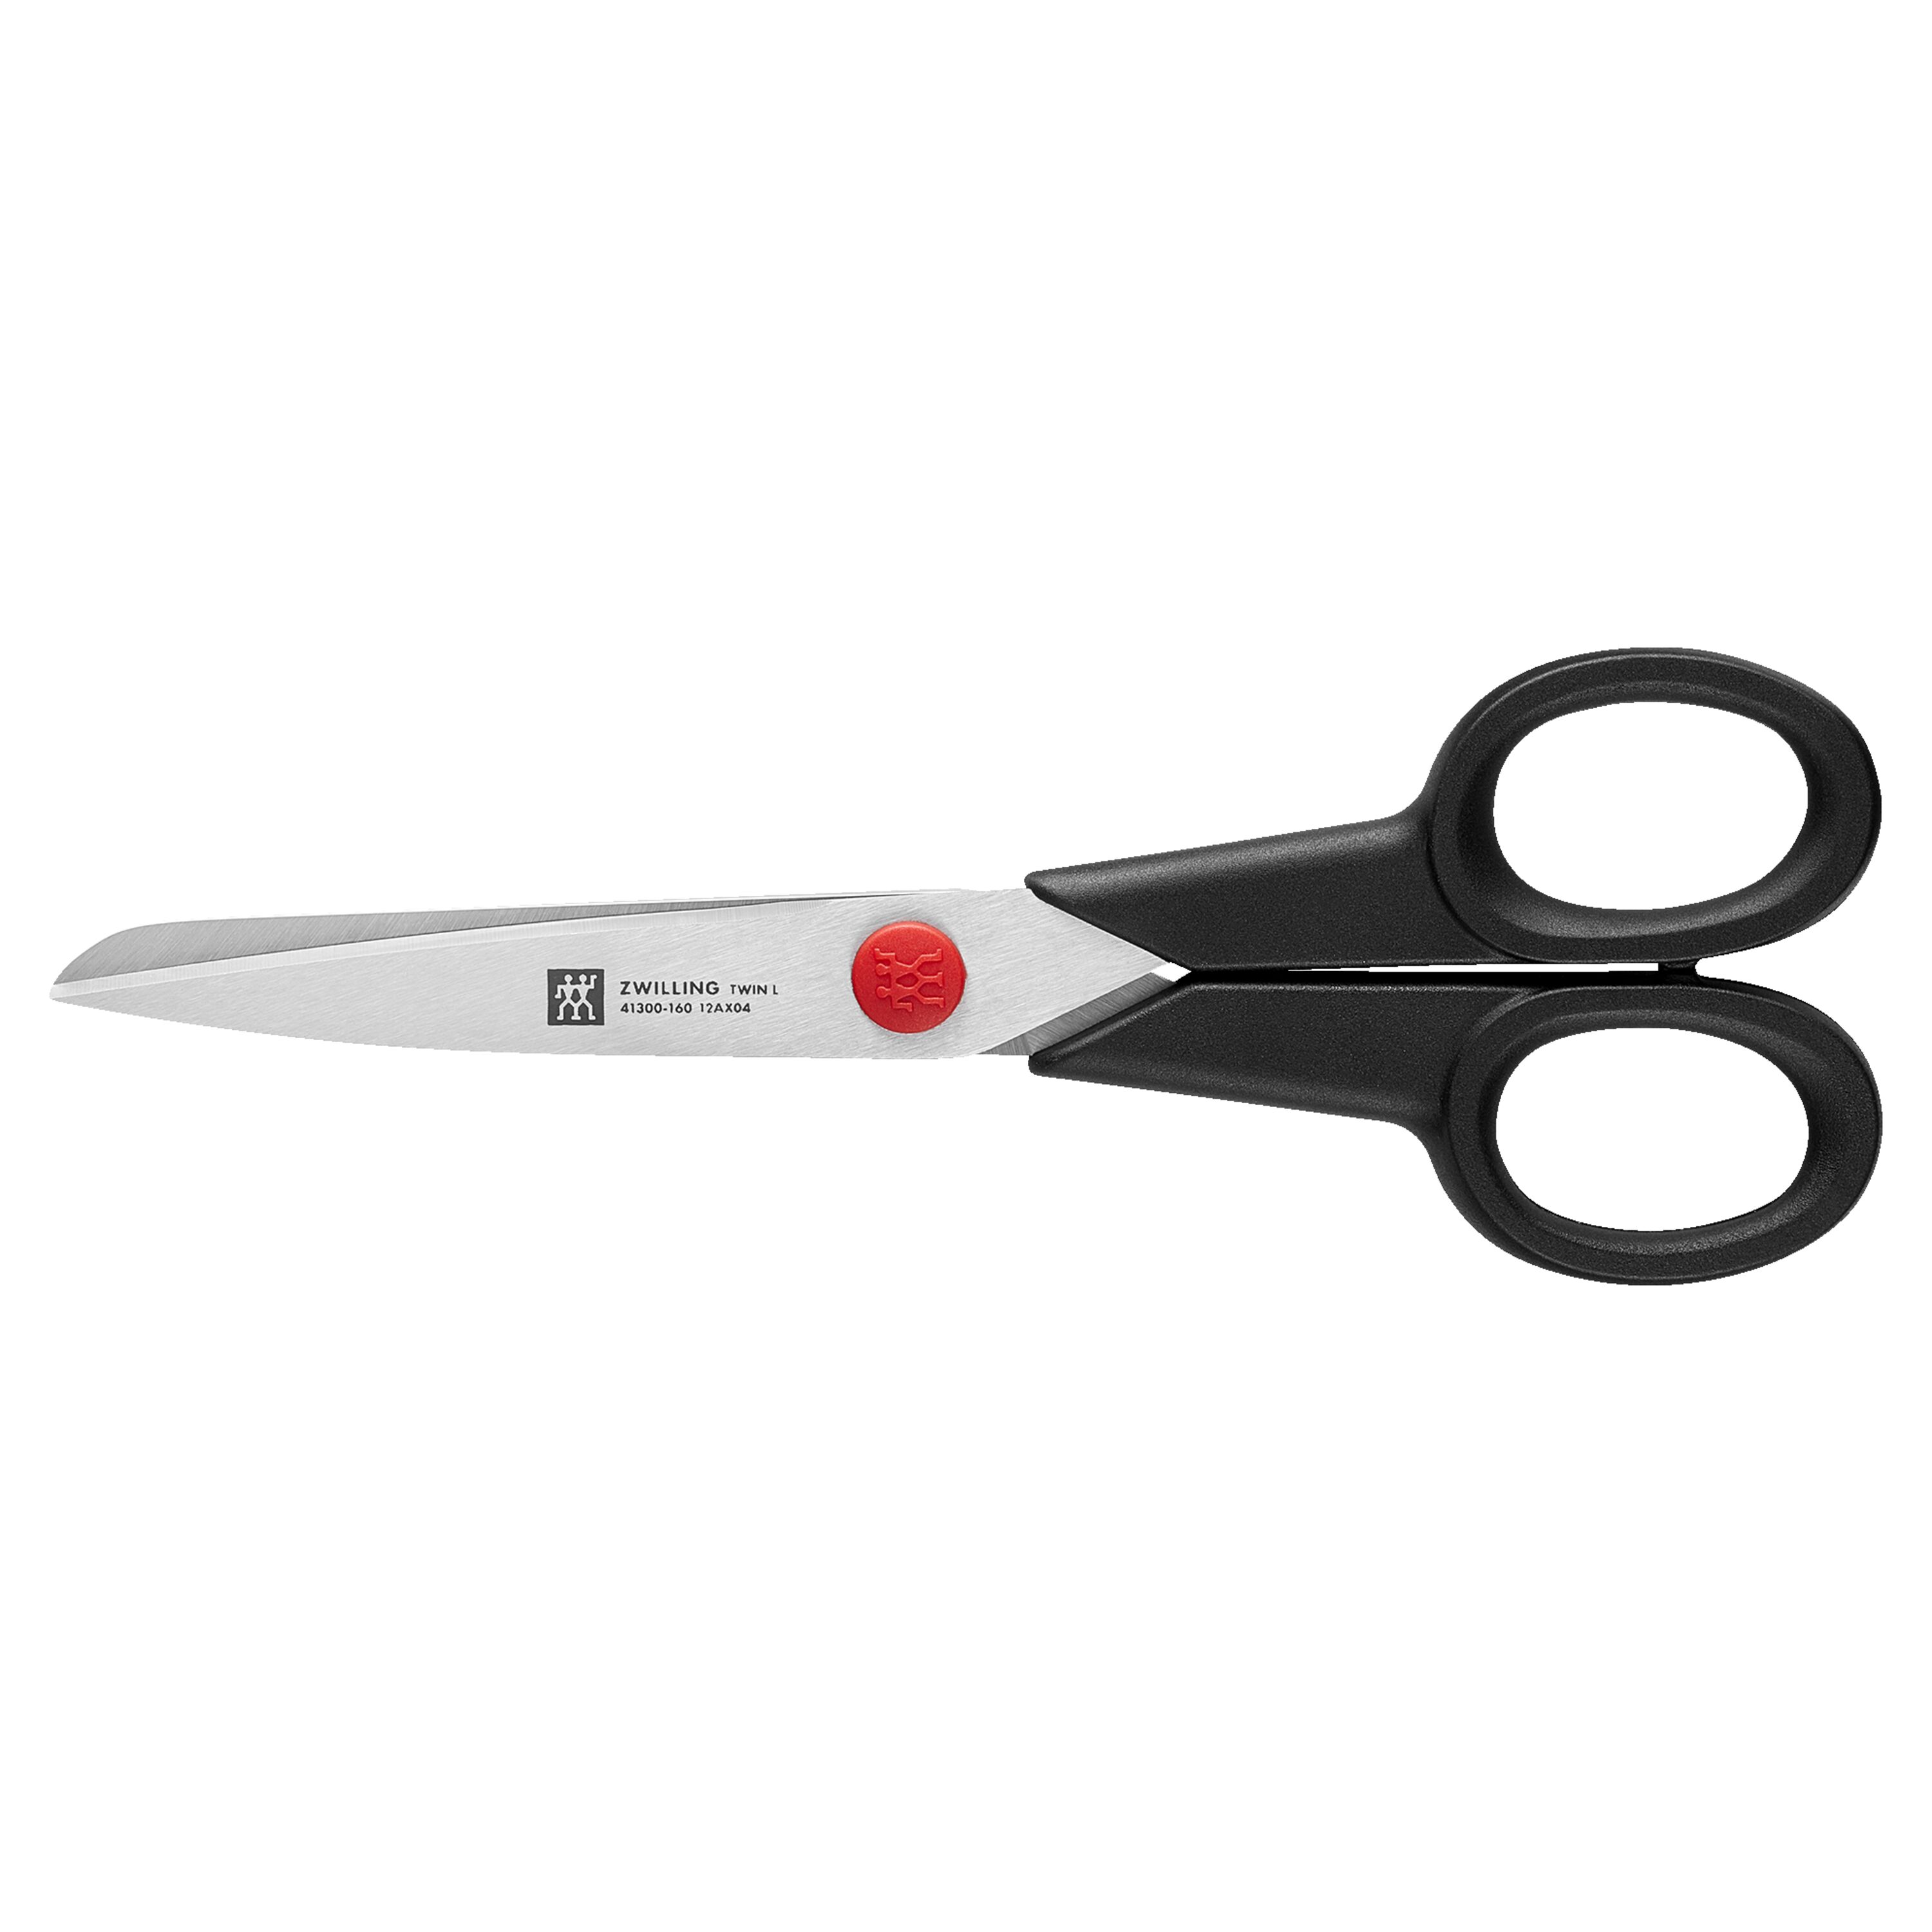 Buy ZWILLING TWIN L Household shear | ZWILLING.COM